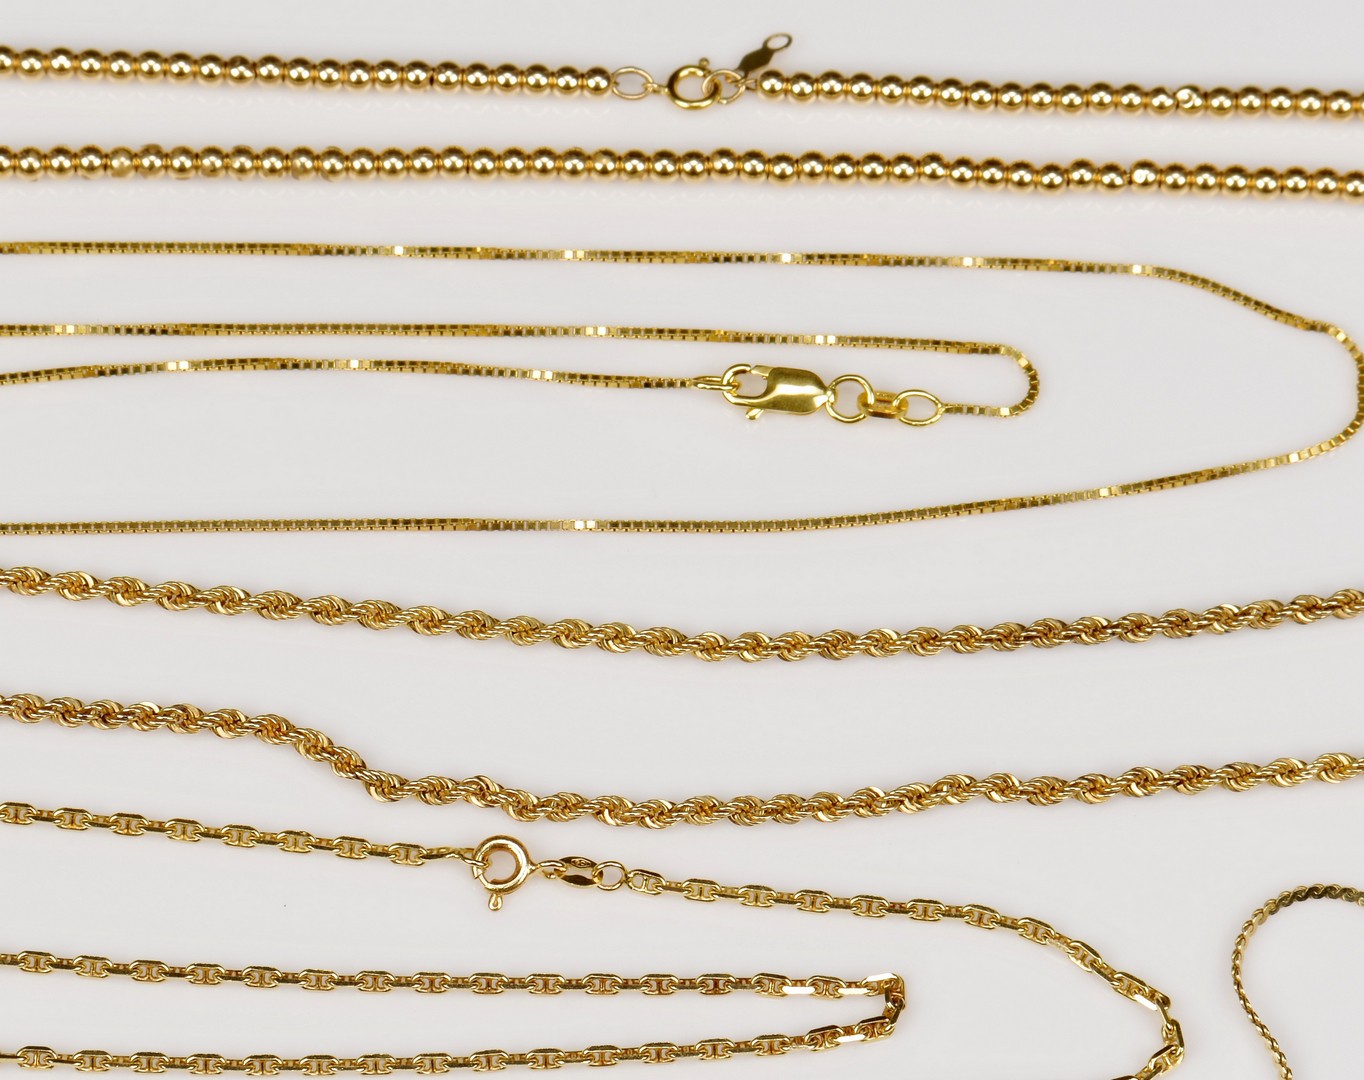 Lot 941: Group of 5 14K Gold Chains